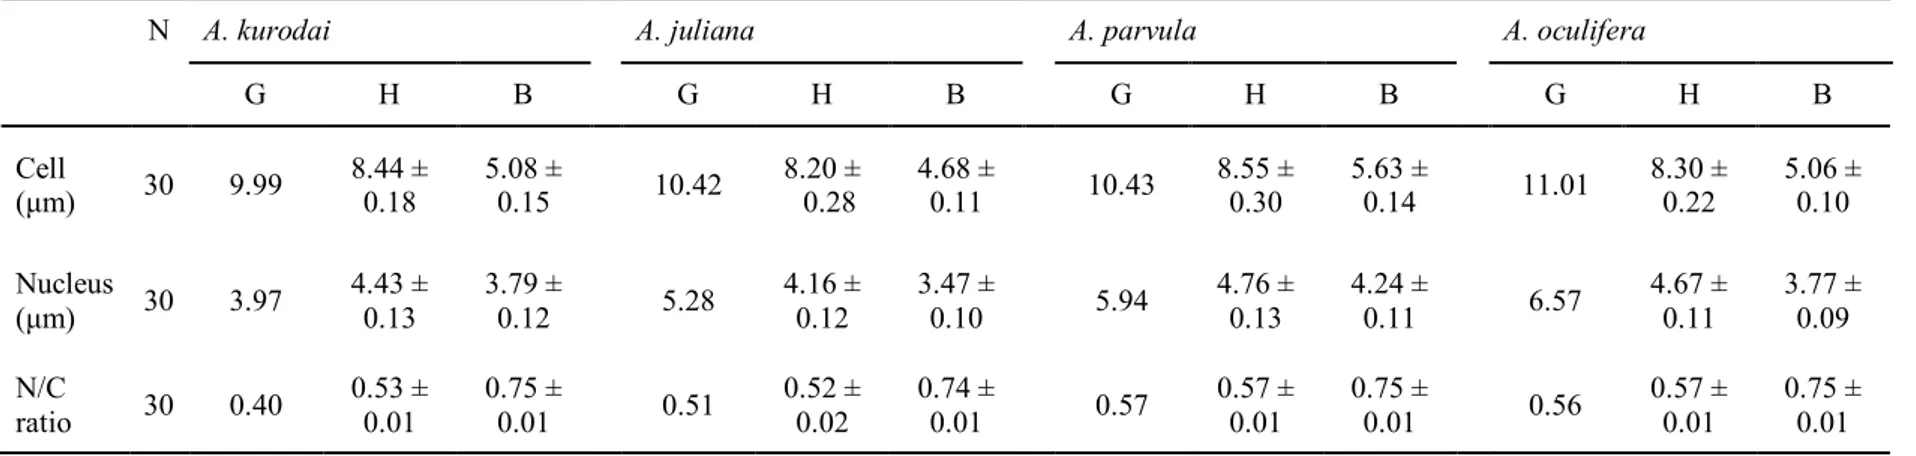 Table 1. Cell and  nucleus diameters and nucleus/cell  (N/C) ratio  of Aplysia kurodai, A